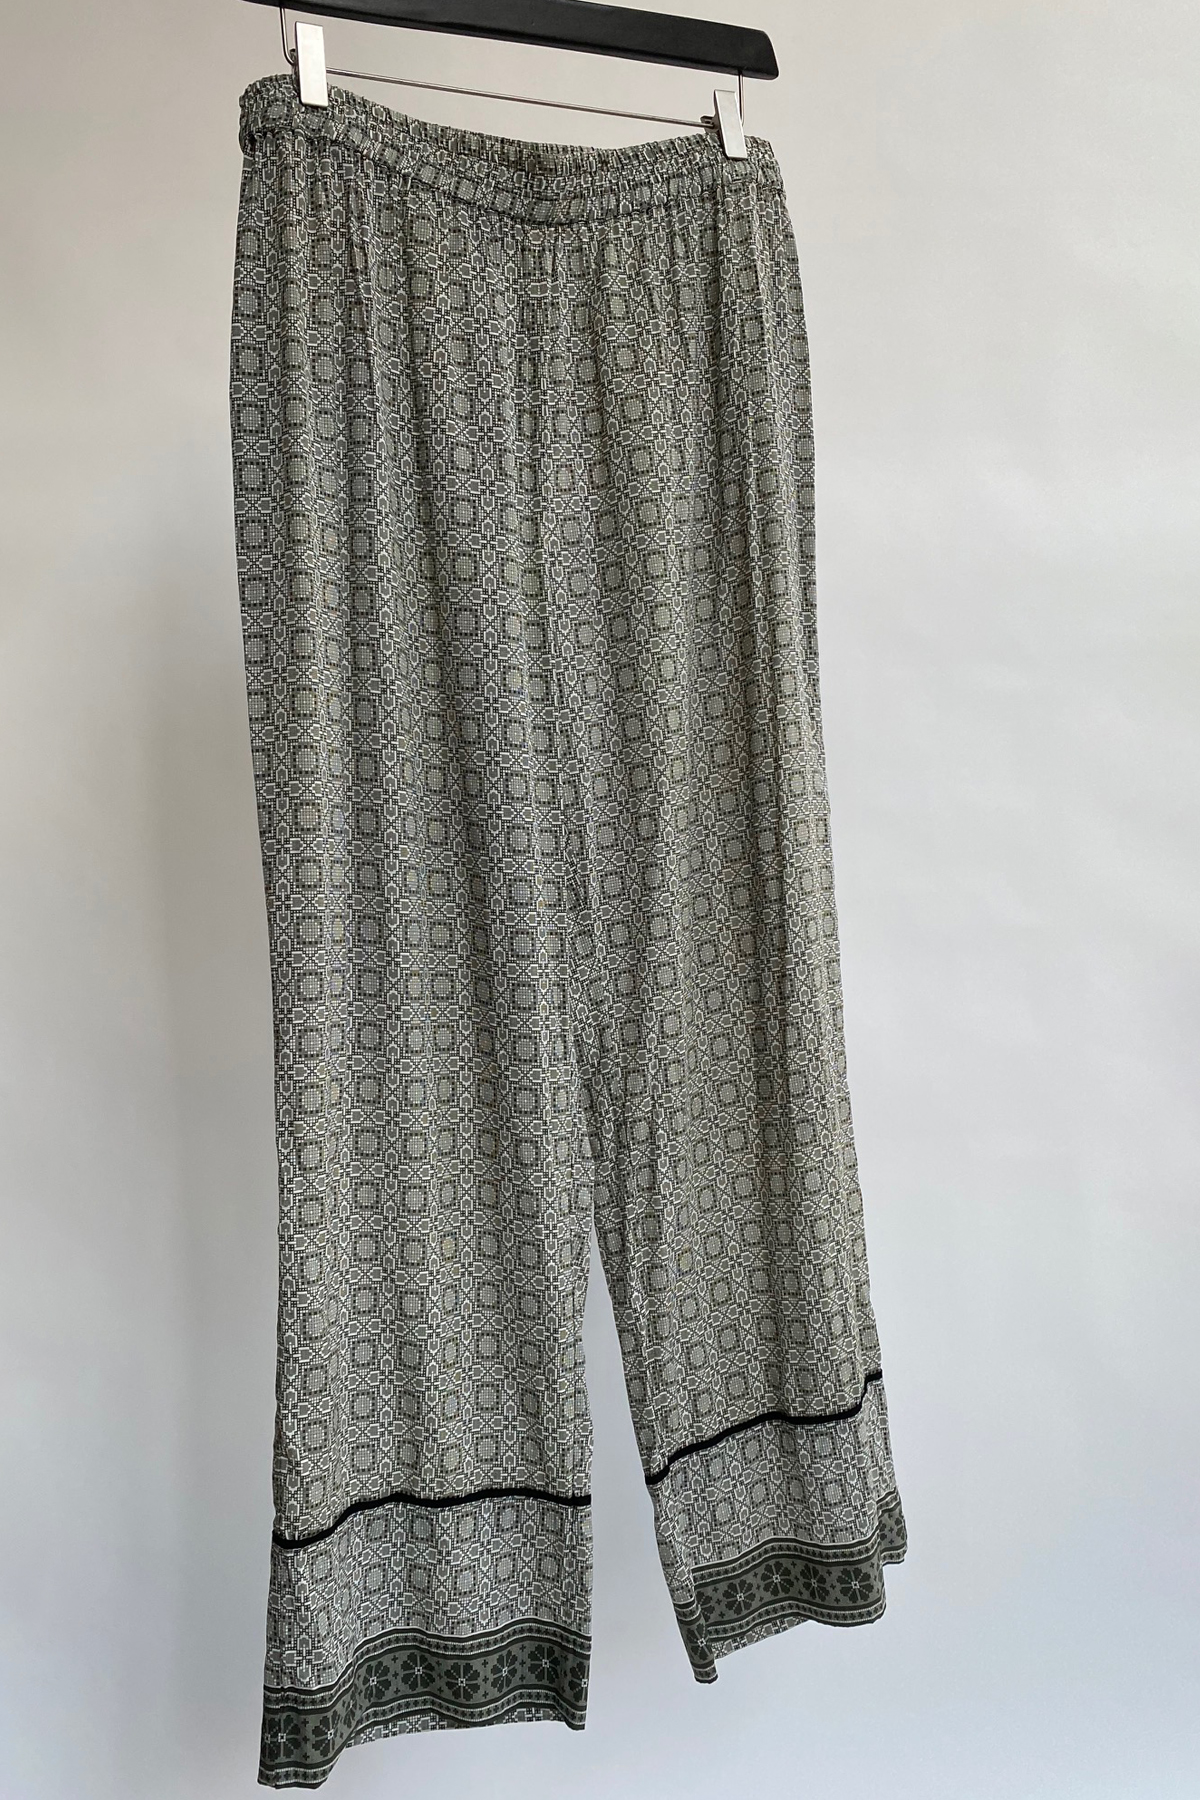 Heartmade Pants Olive / White Print Size 40